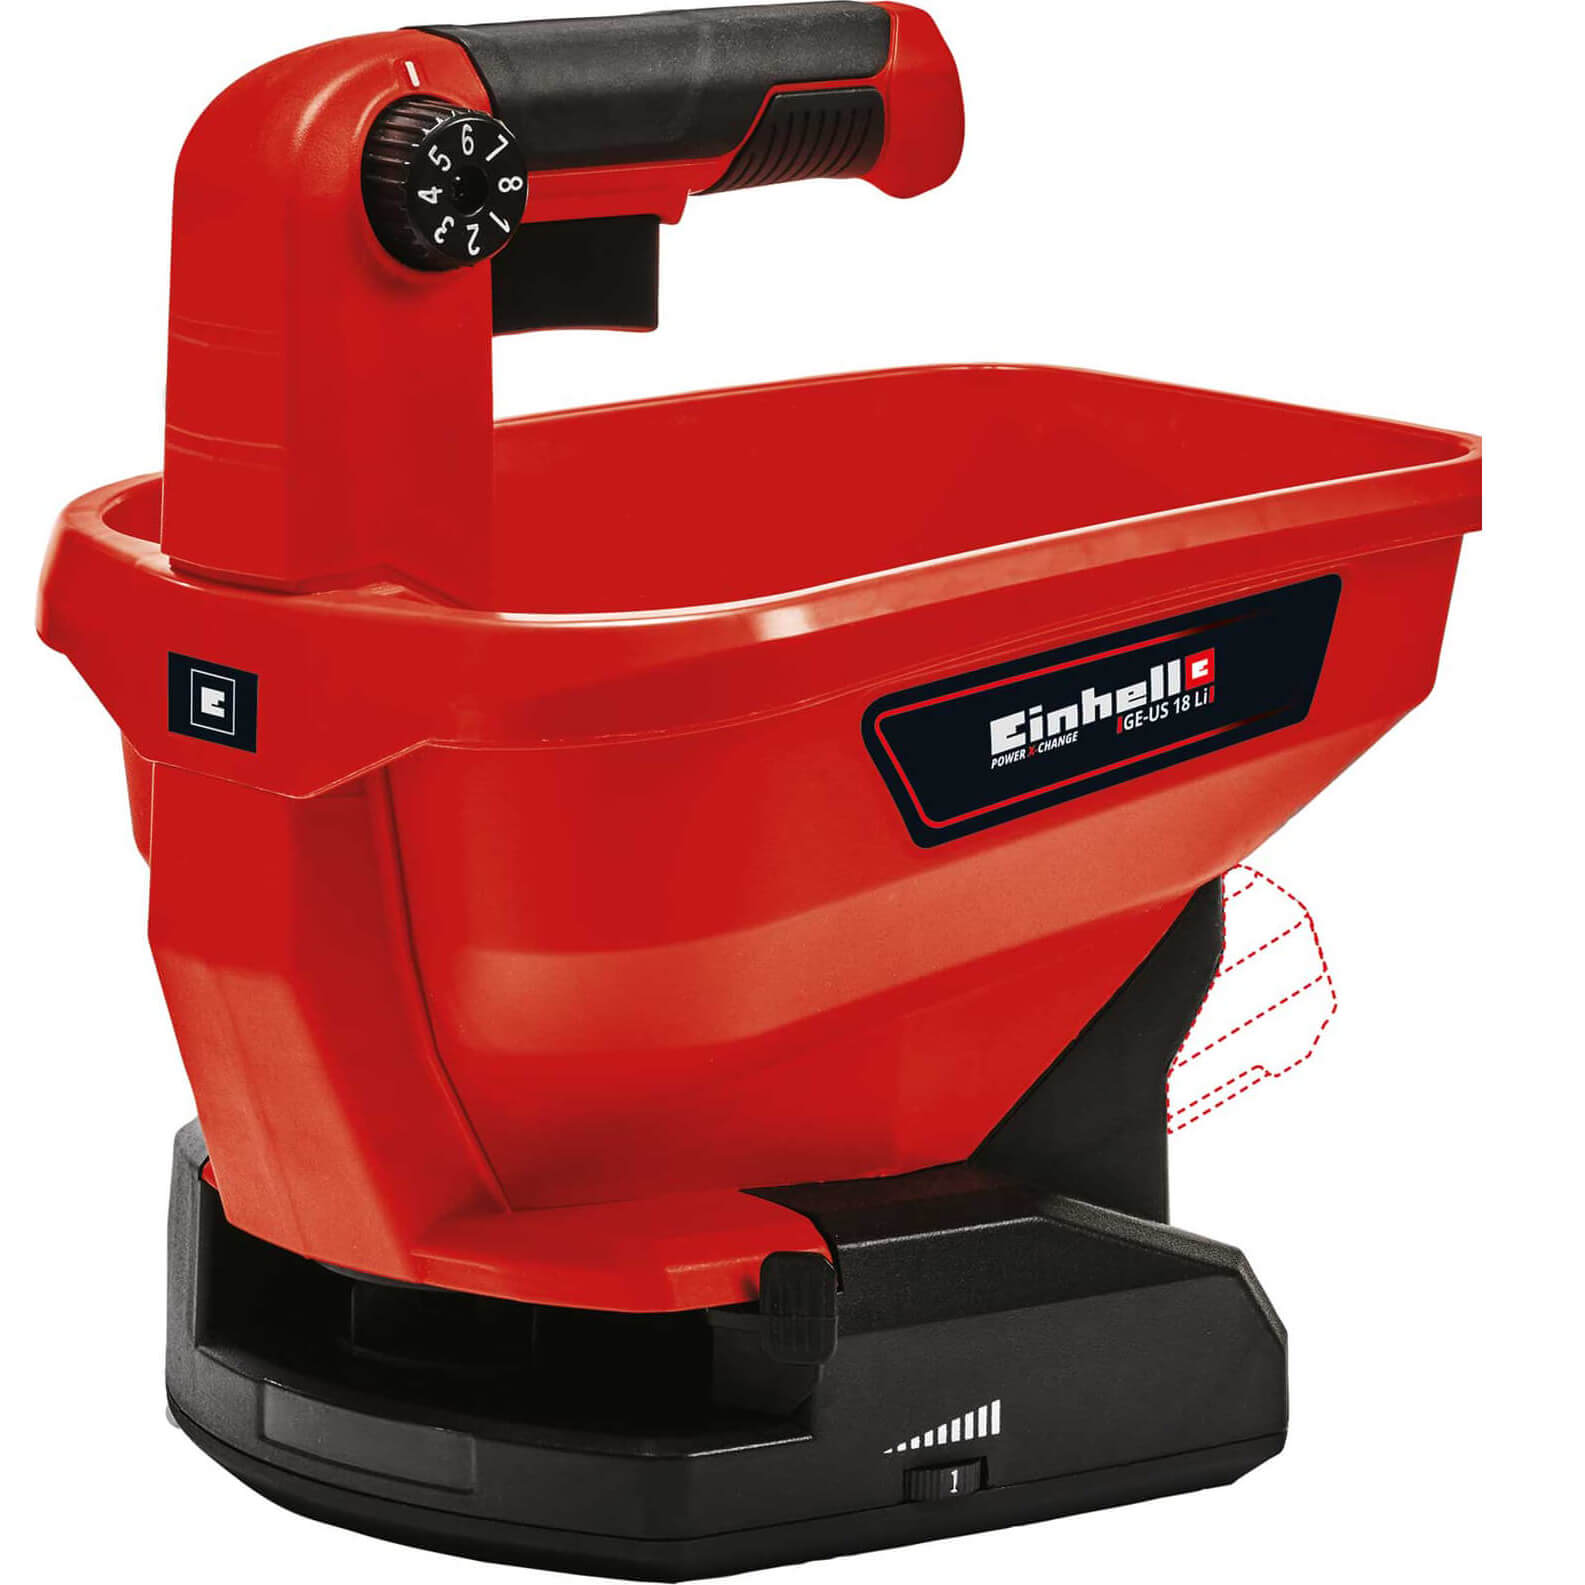 Image of Einhell GE-US 18 Li Grass, Salt and Seed Spreader No Batteries No Charger